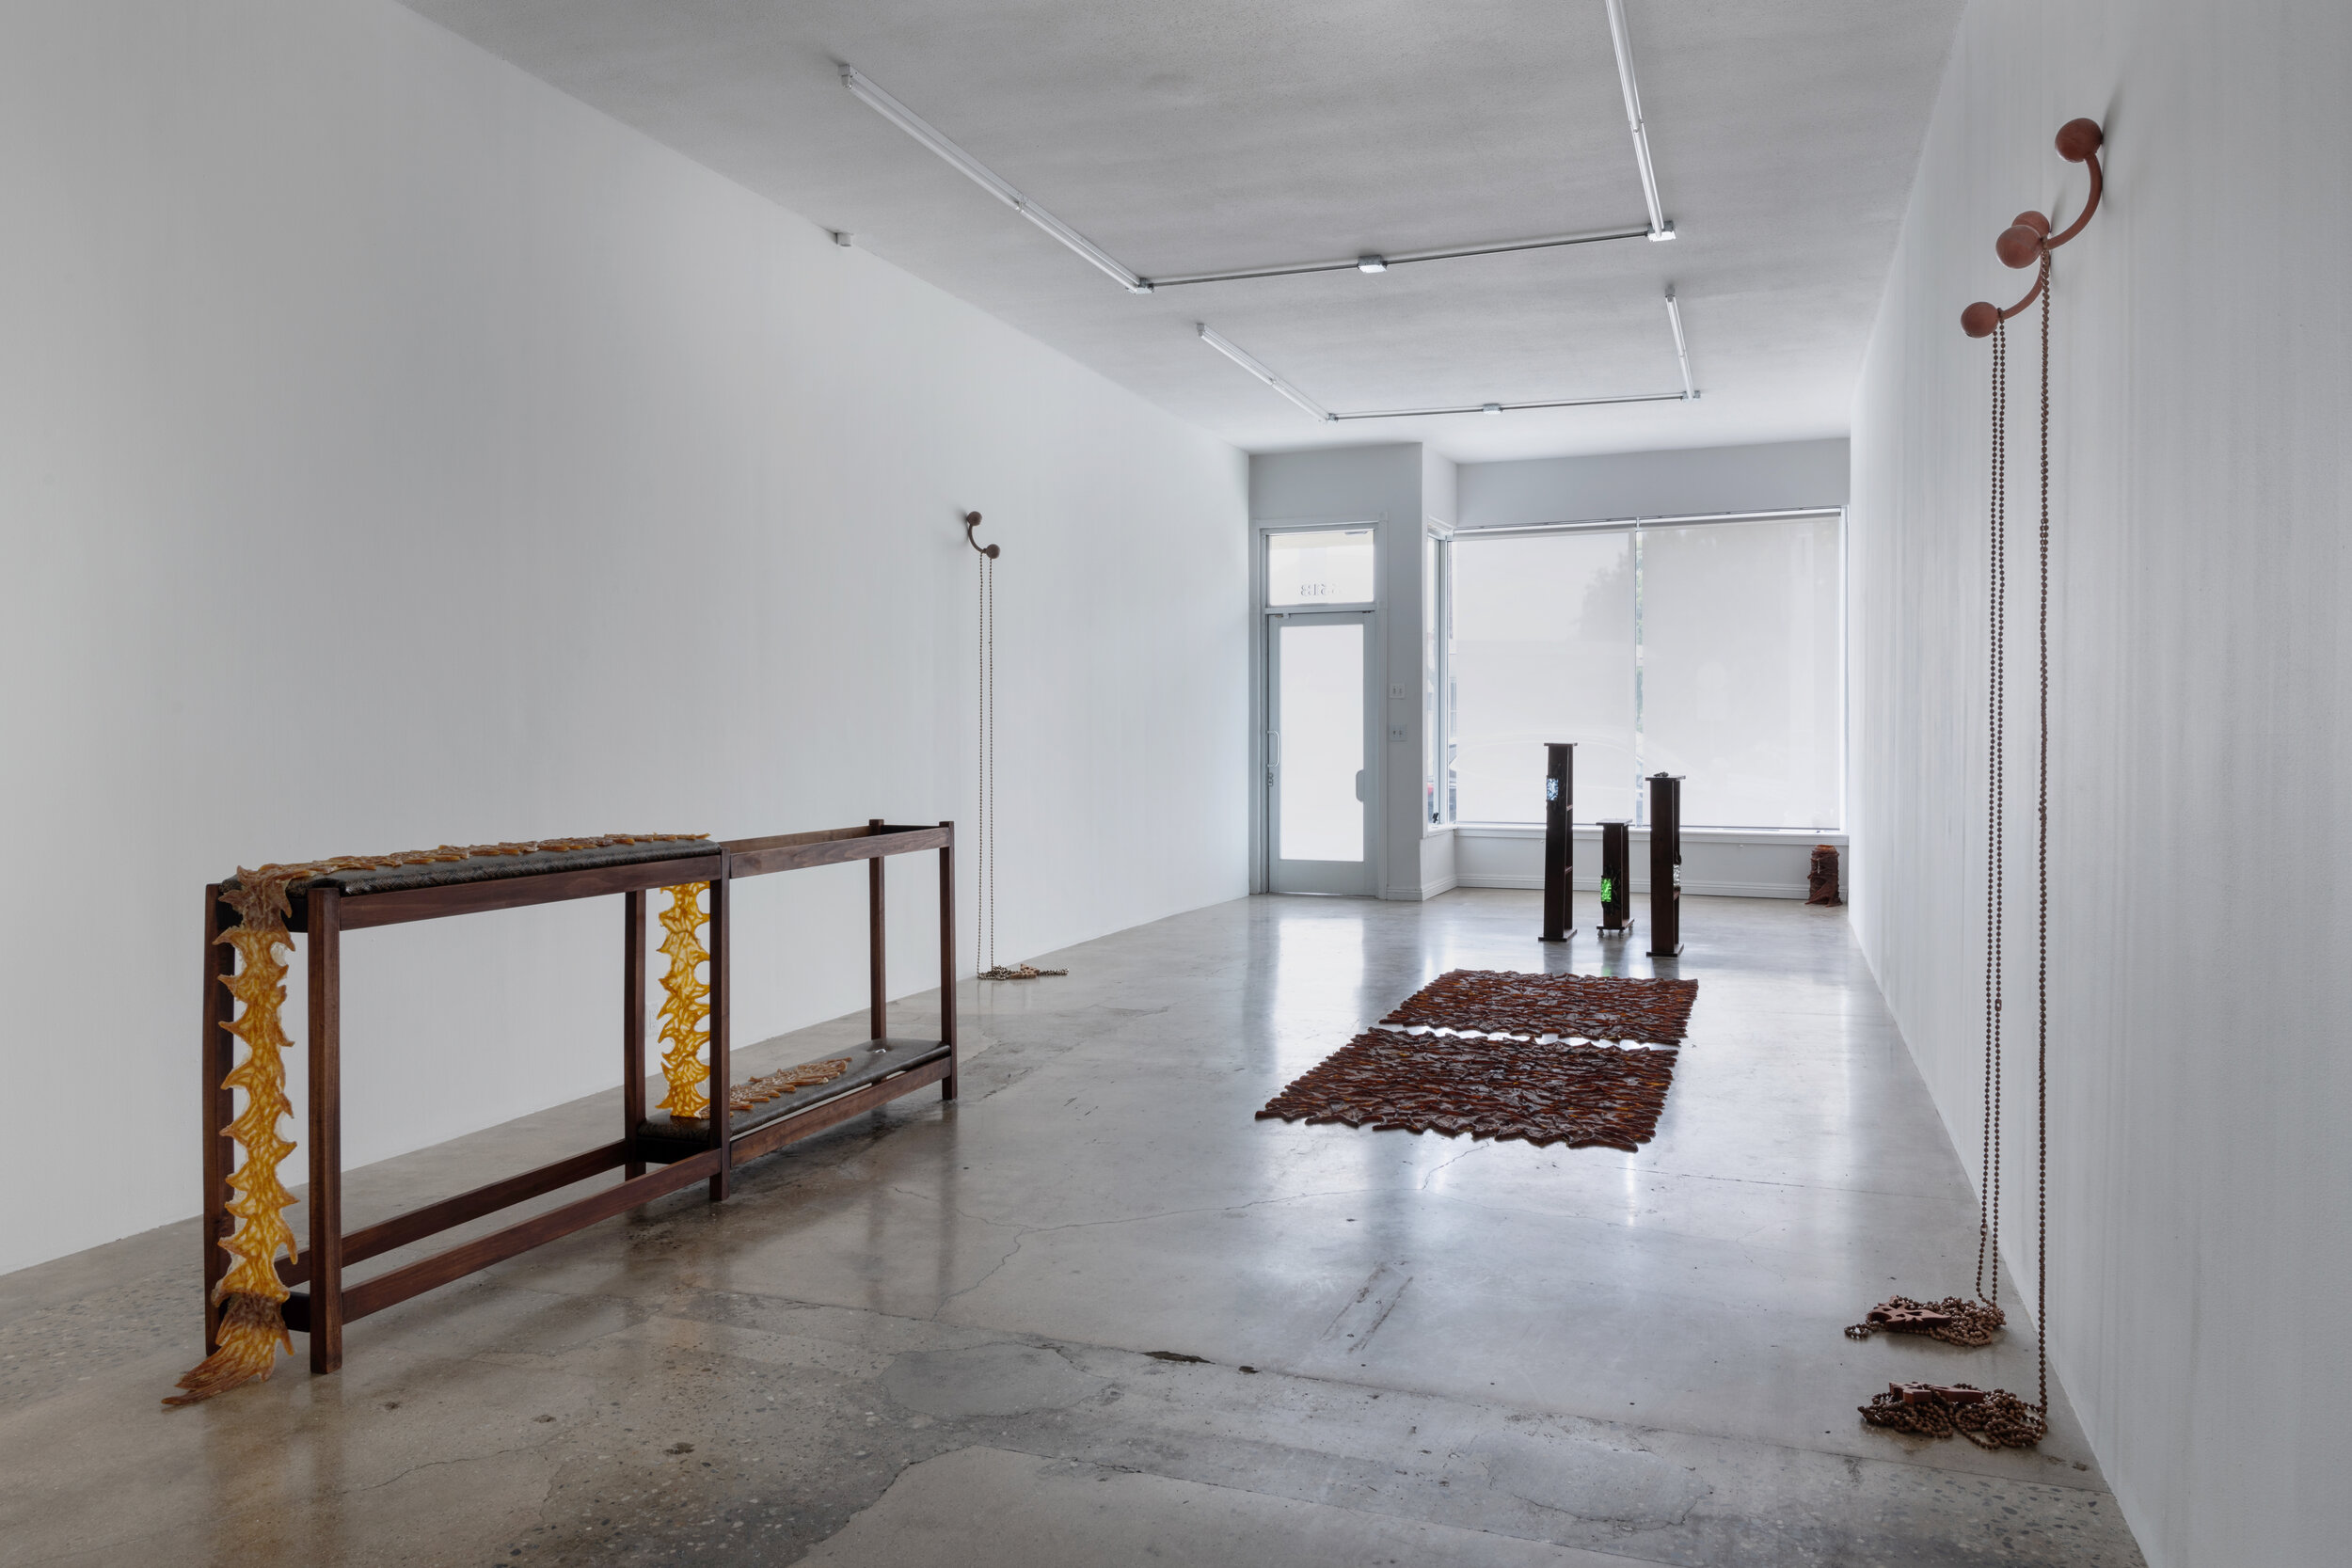  Installation view of Sessa Englund:  Fool’s Errand   May 16 - July 4 2021  Photo by Ruben Diaz   Link to press release  